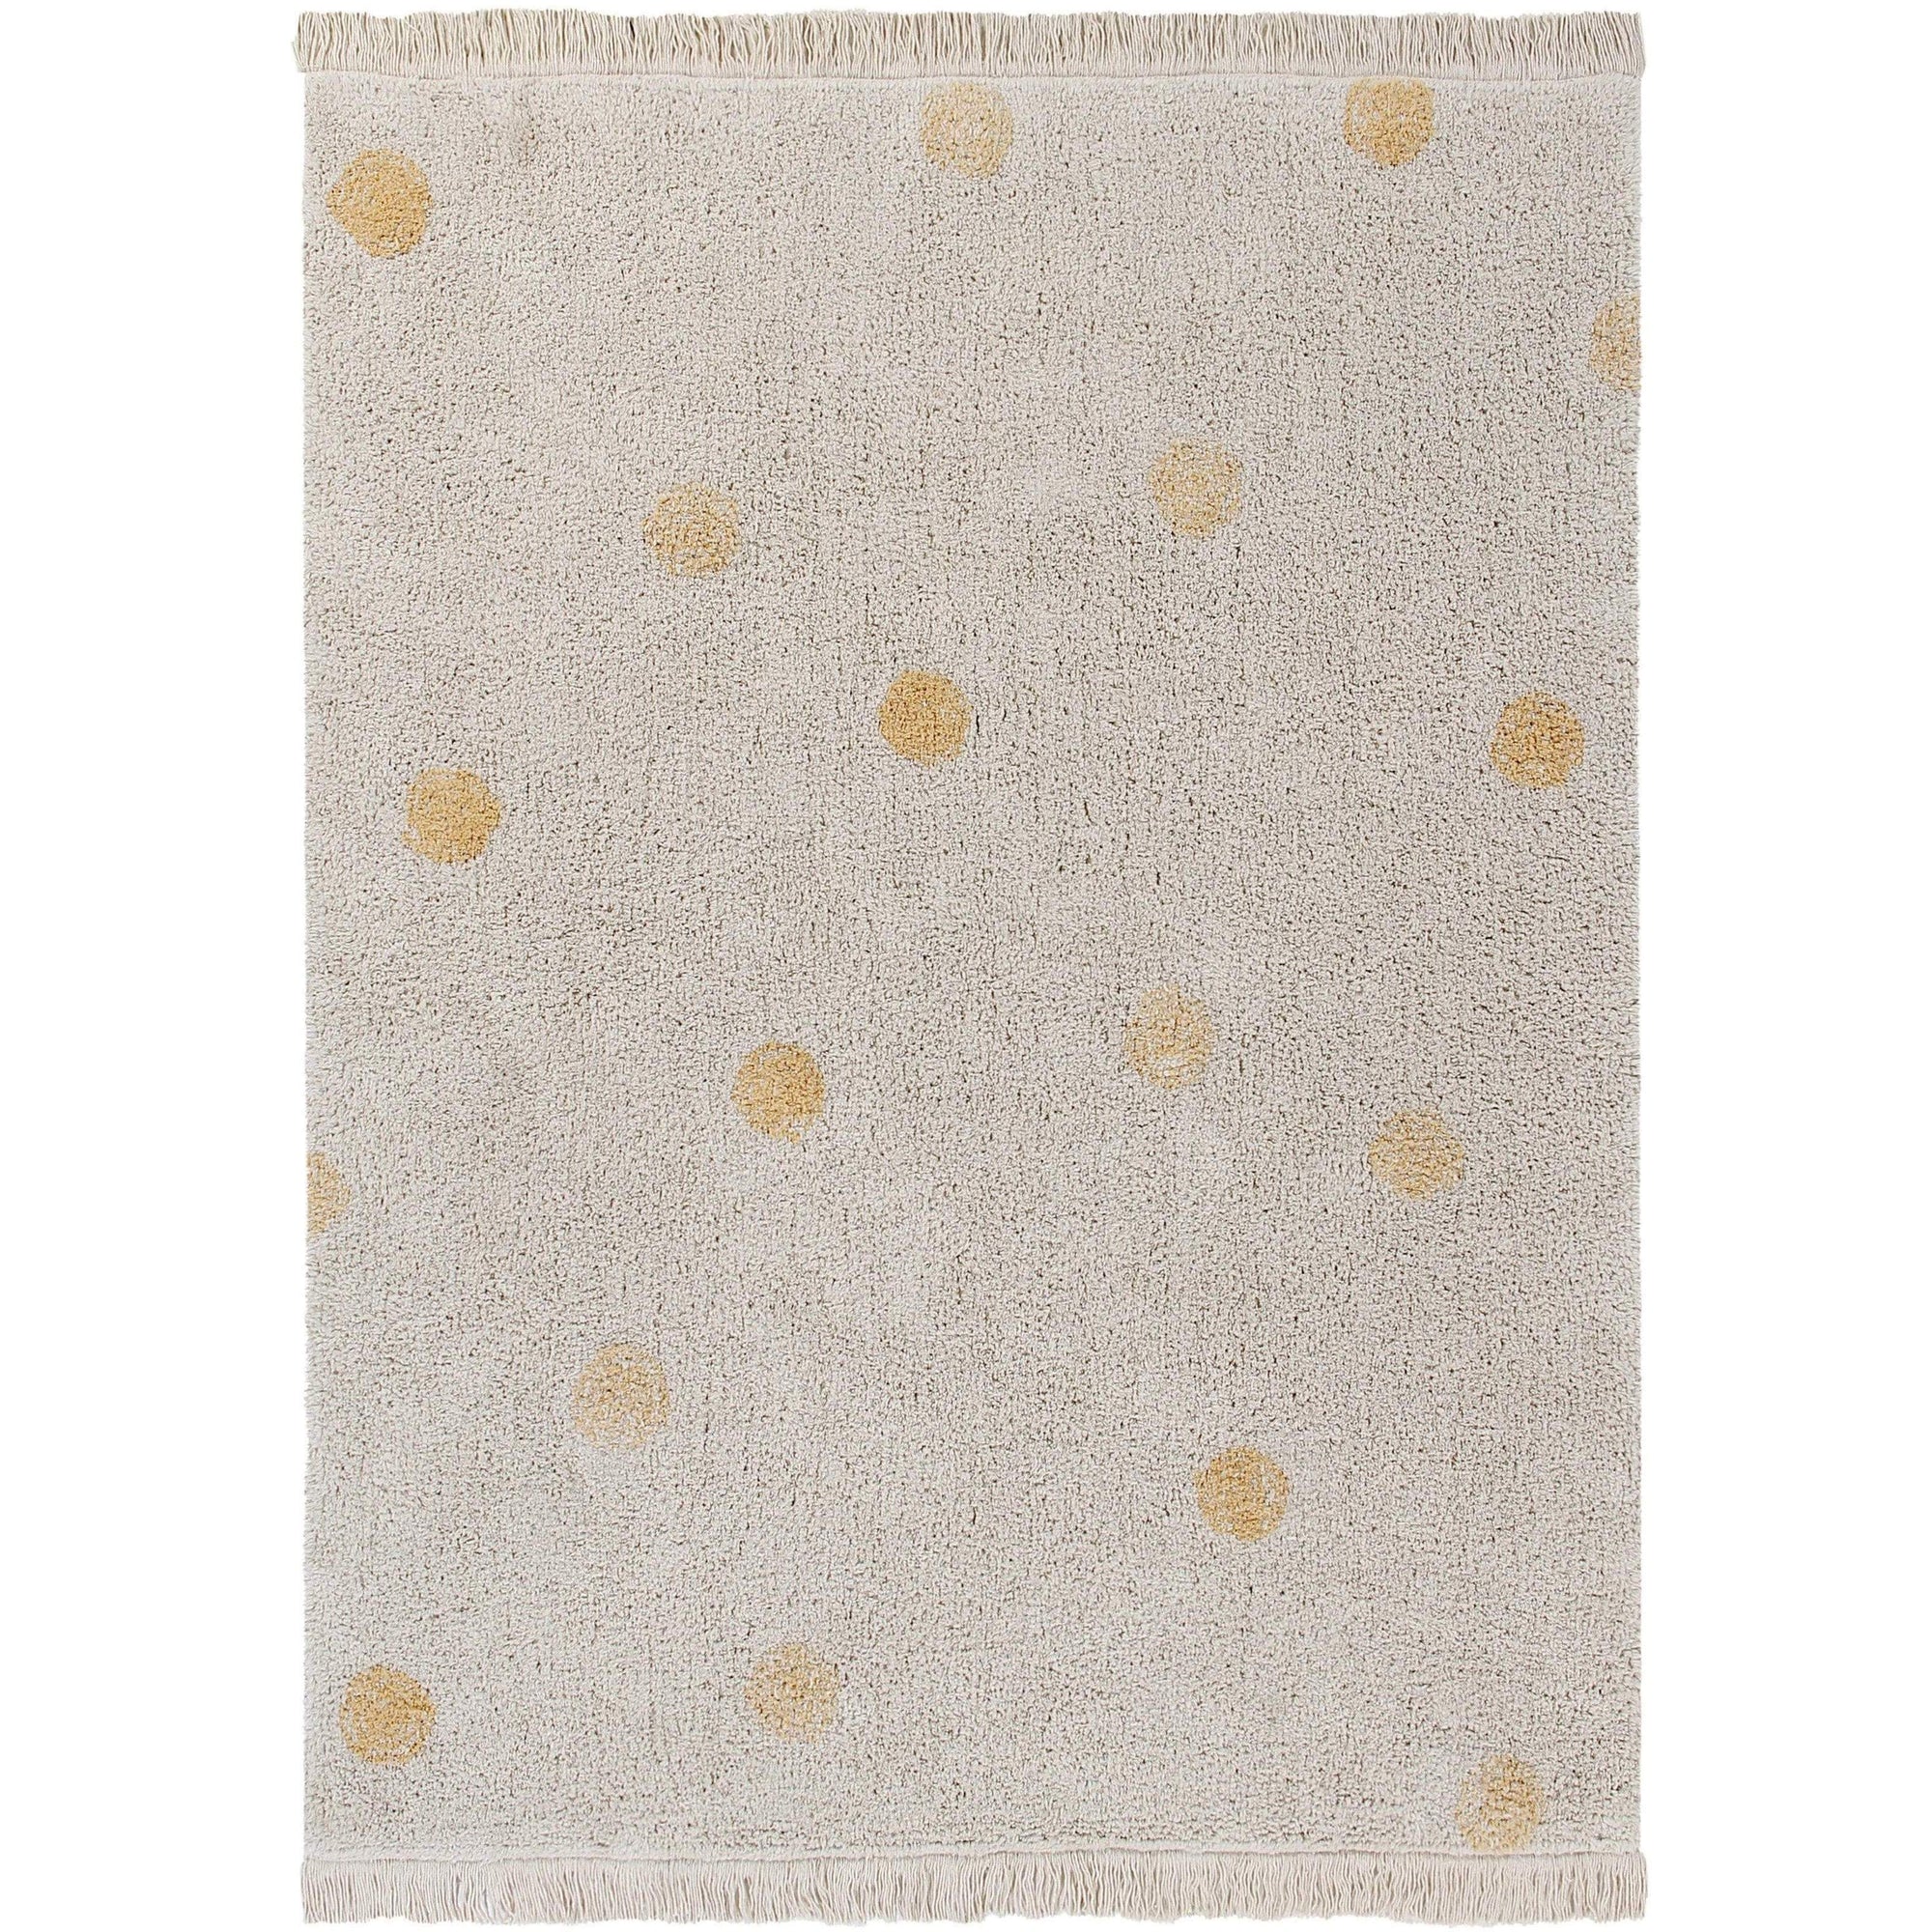 Lorena Canals Hippy Dots Natural Honey Washable Area Rug